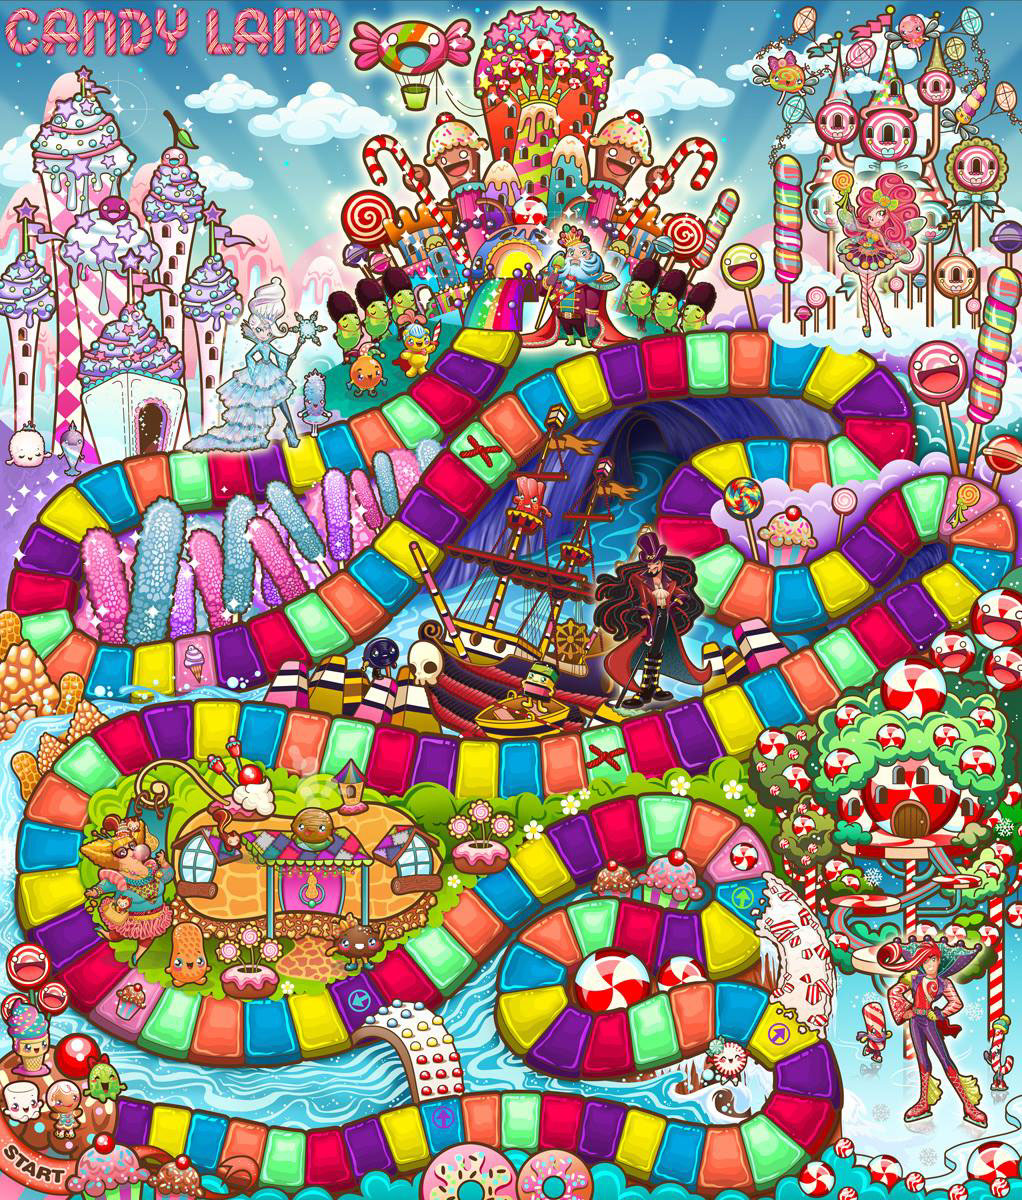 Playing Candyland Online